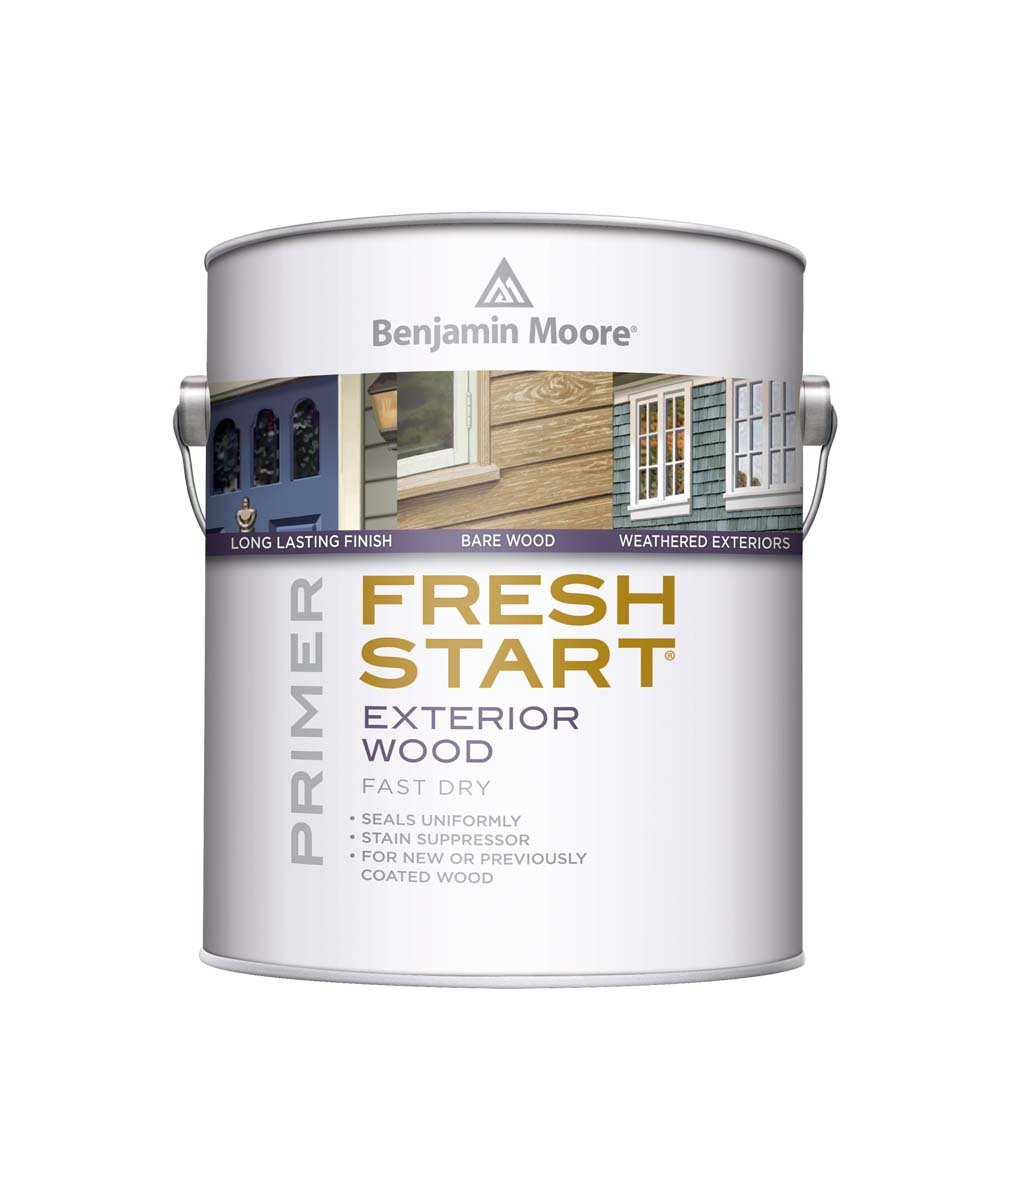 Ricciardi Brothers - Your Local Benjamin Moore Store | 2340 Haverford Rd, Ardmore, PA 19003 | Phone: (610) 642-3223